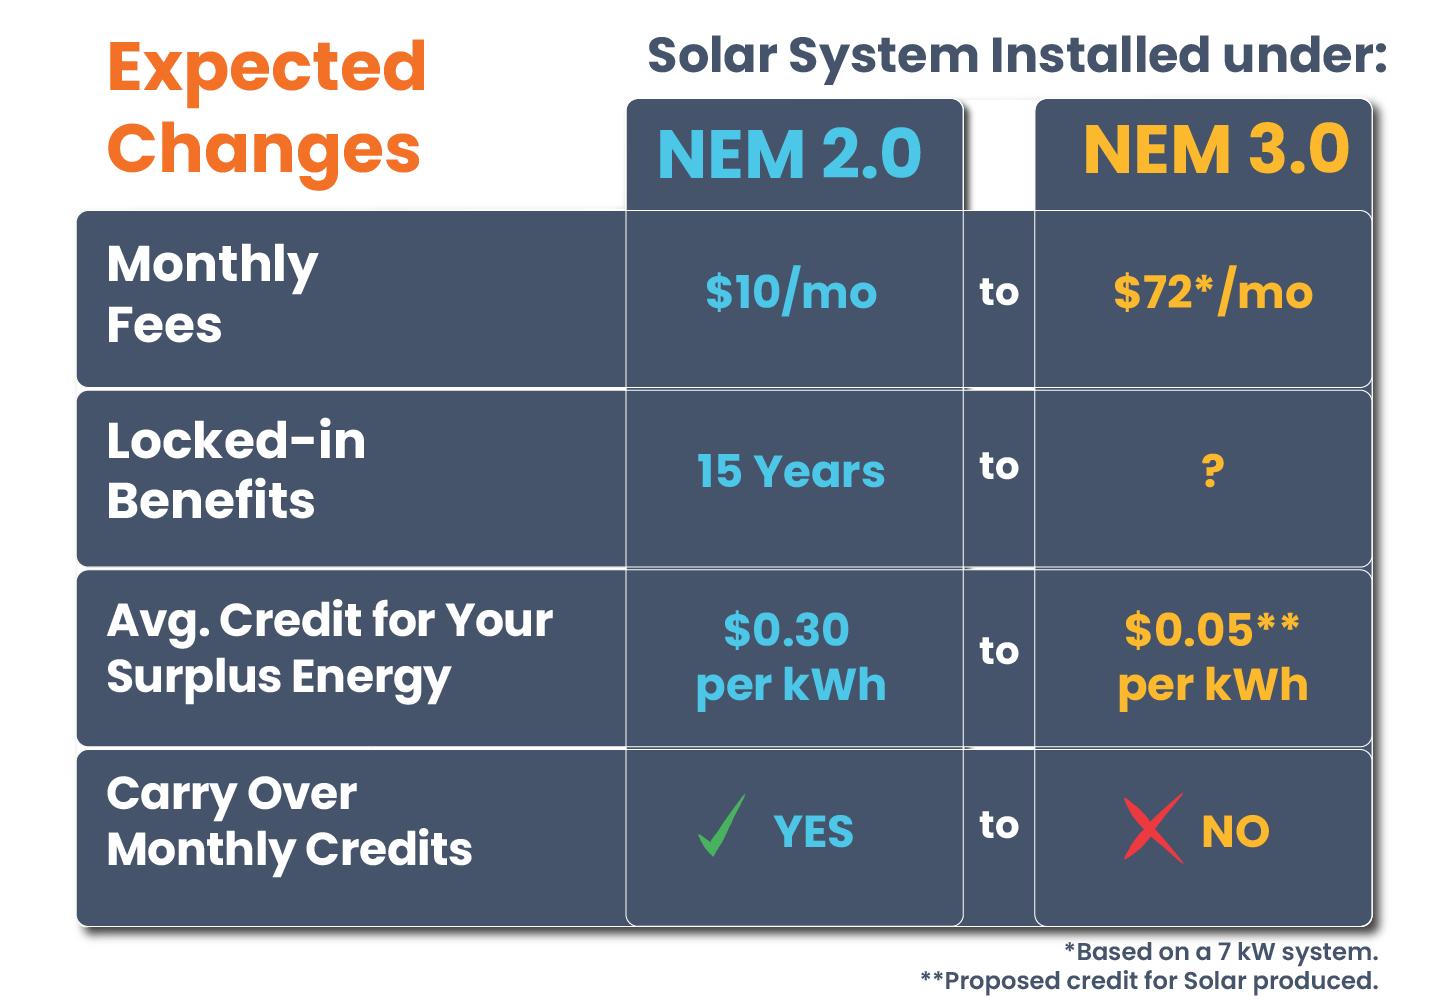 Current Expected Changes with Net Energy Metering 3.0